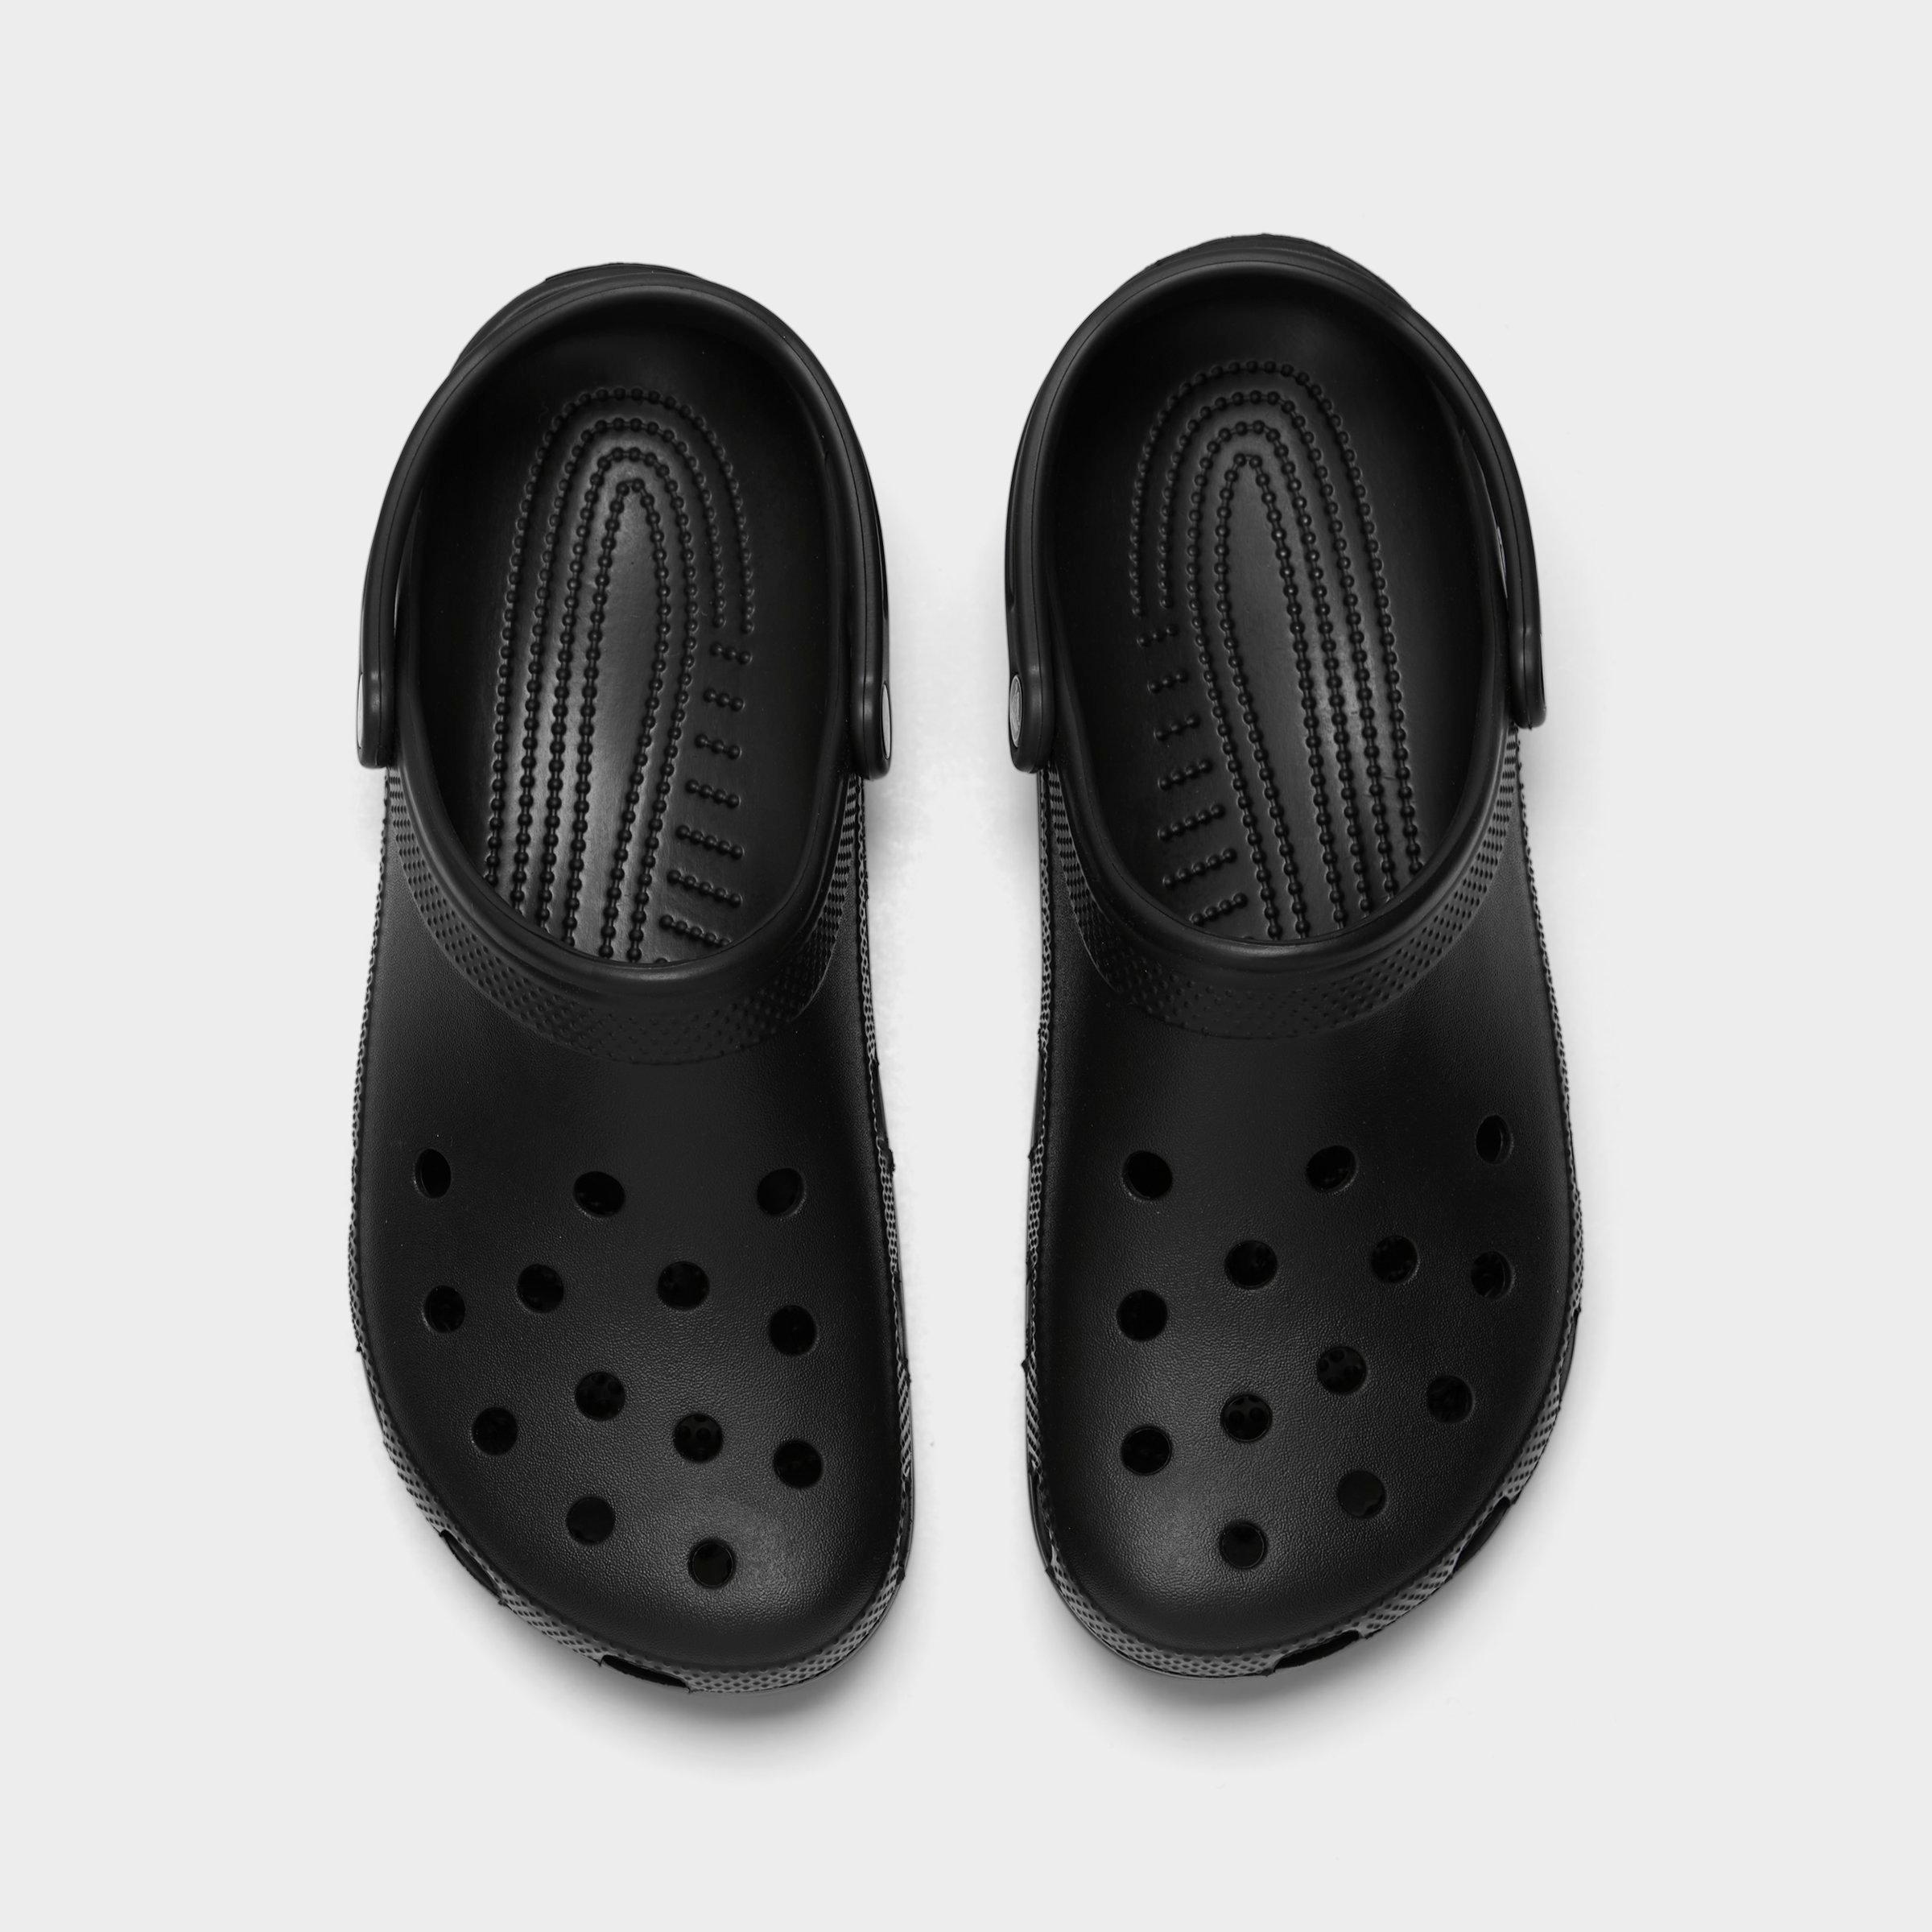 crocs afterpay Online shopping has 